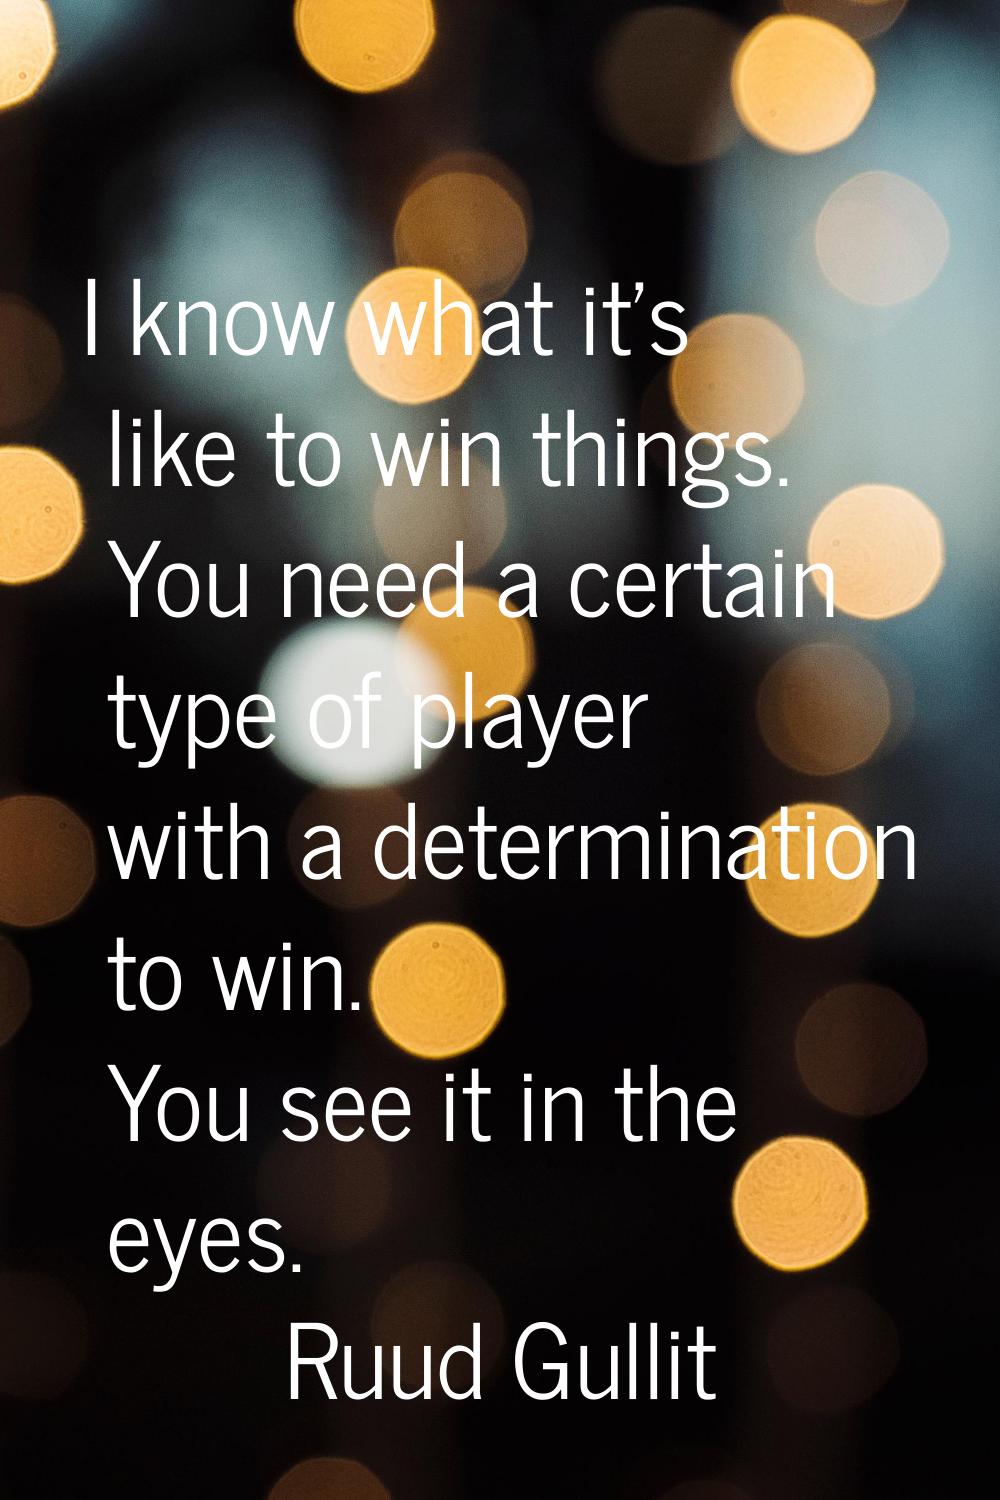 I know what it's like to win things. You need a certain type of player with a determination to win.